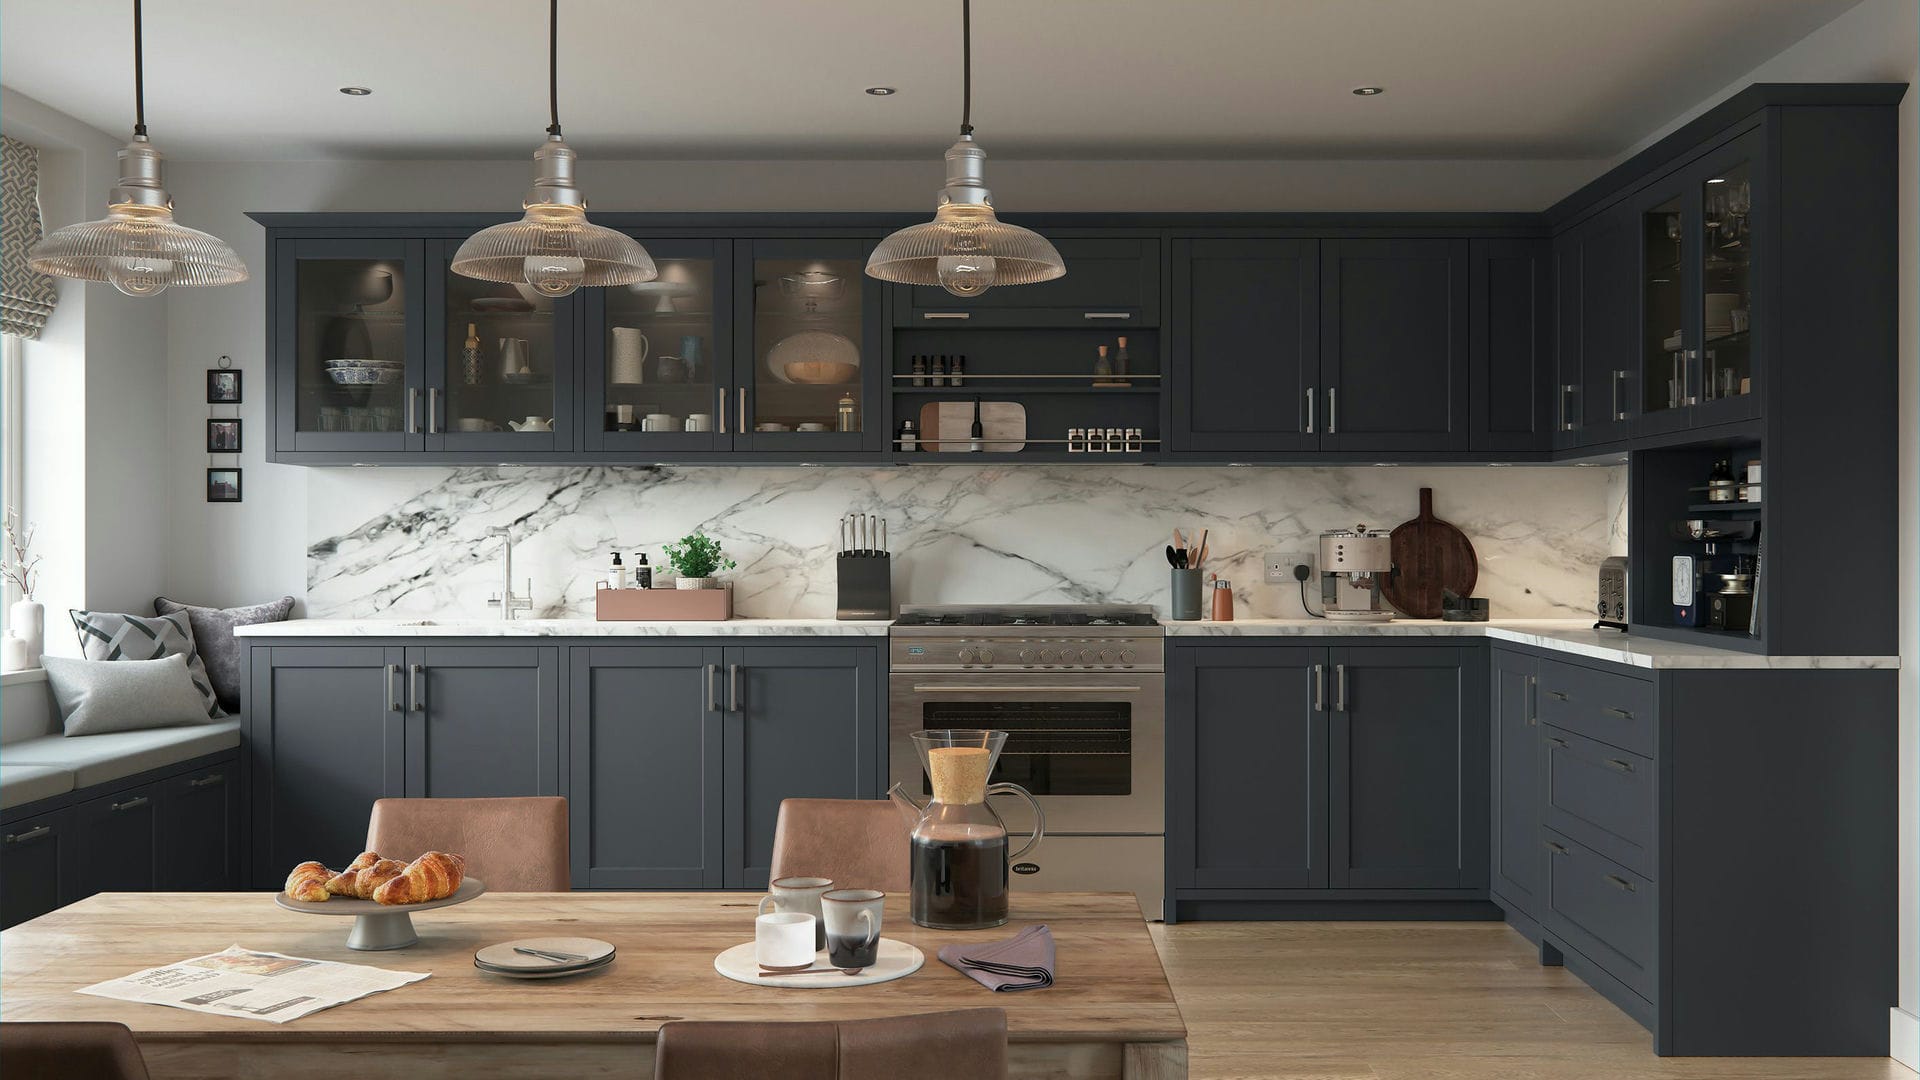 Signature Smooth Indigo kitchens featuring a seamless finish in a rich indigo blue, for a sleek look